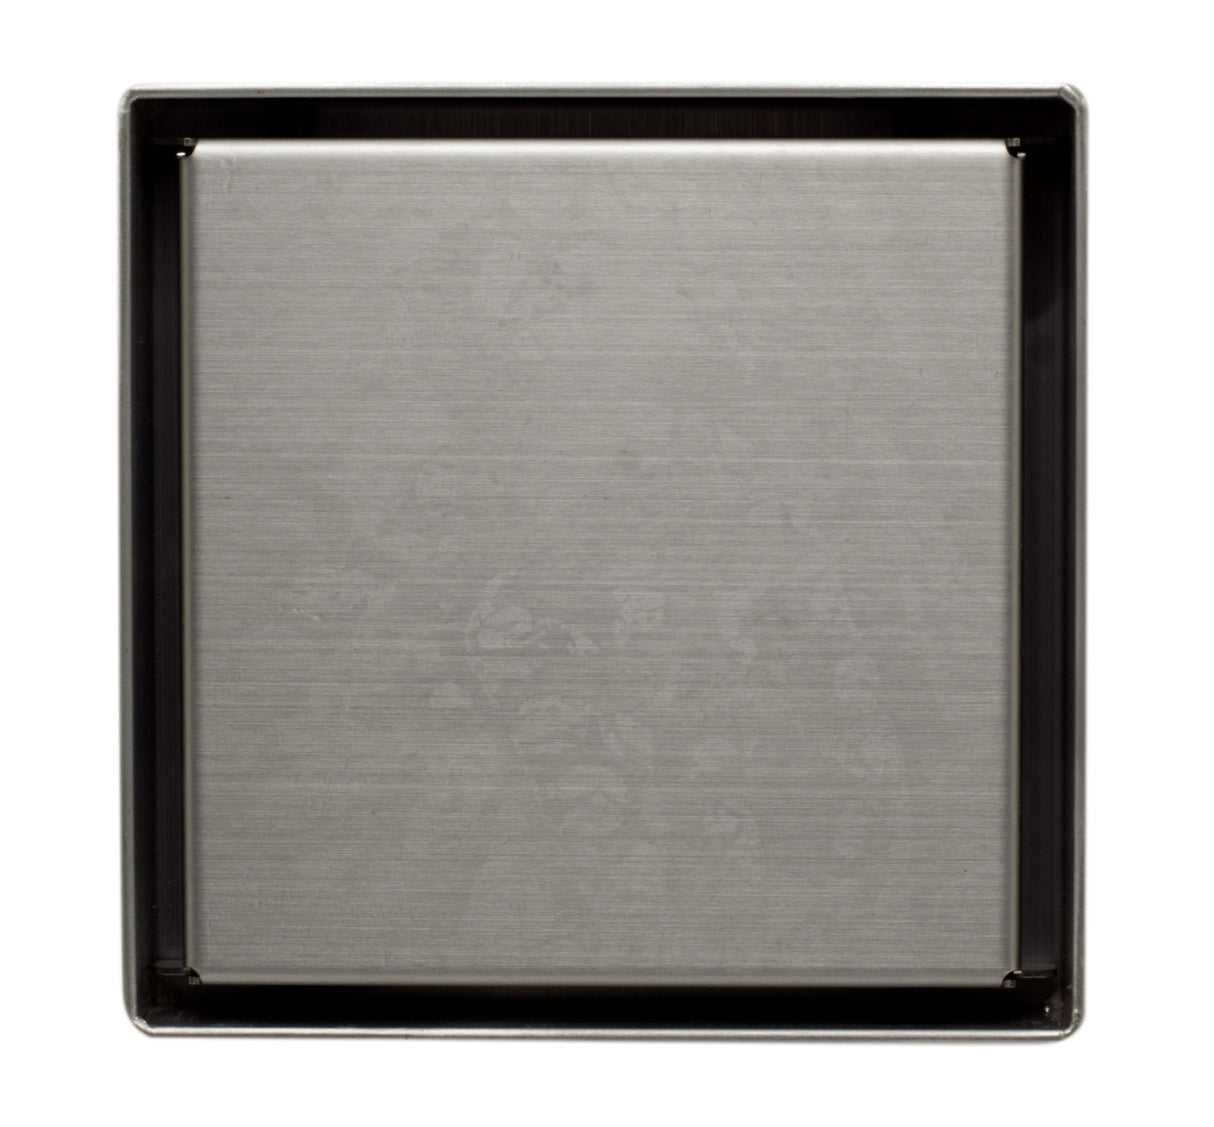 ALFI brand ABSD55B-BSS 5" x 5" Modern Square Brushed Stainless Steel Shower Drain with Solid Cover